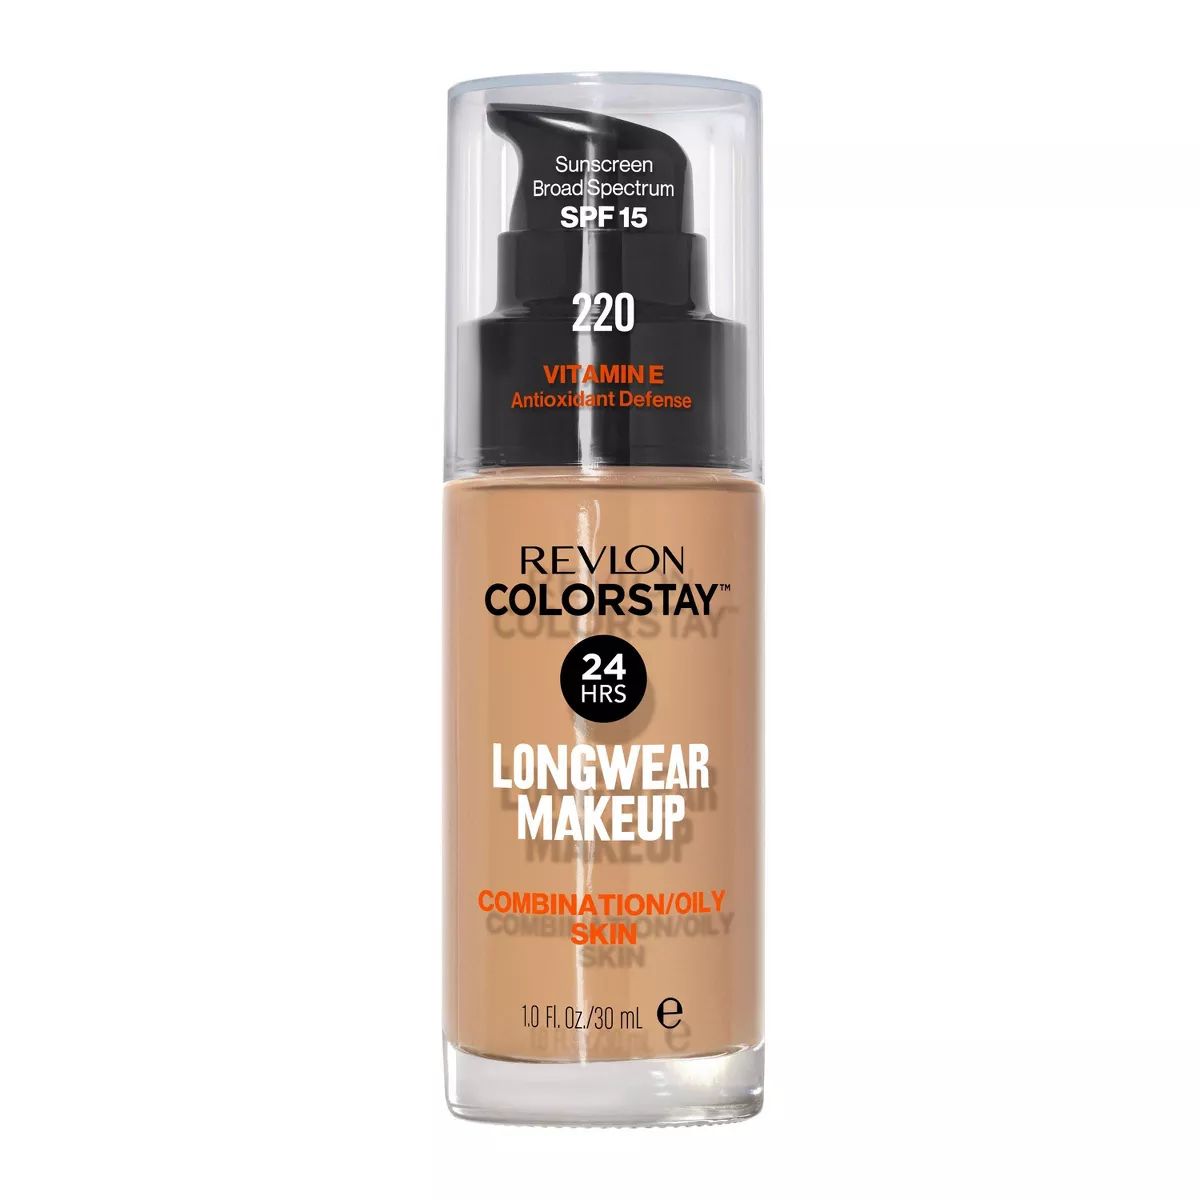 Revlon ColorStay Makeup for Combination/Oily Skin with SPF 15 - 1 fl oz | Target